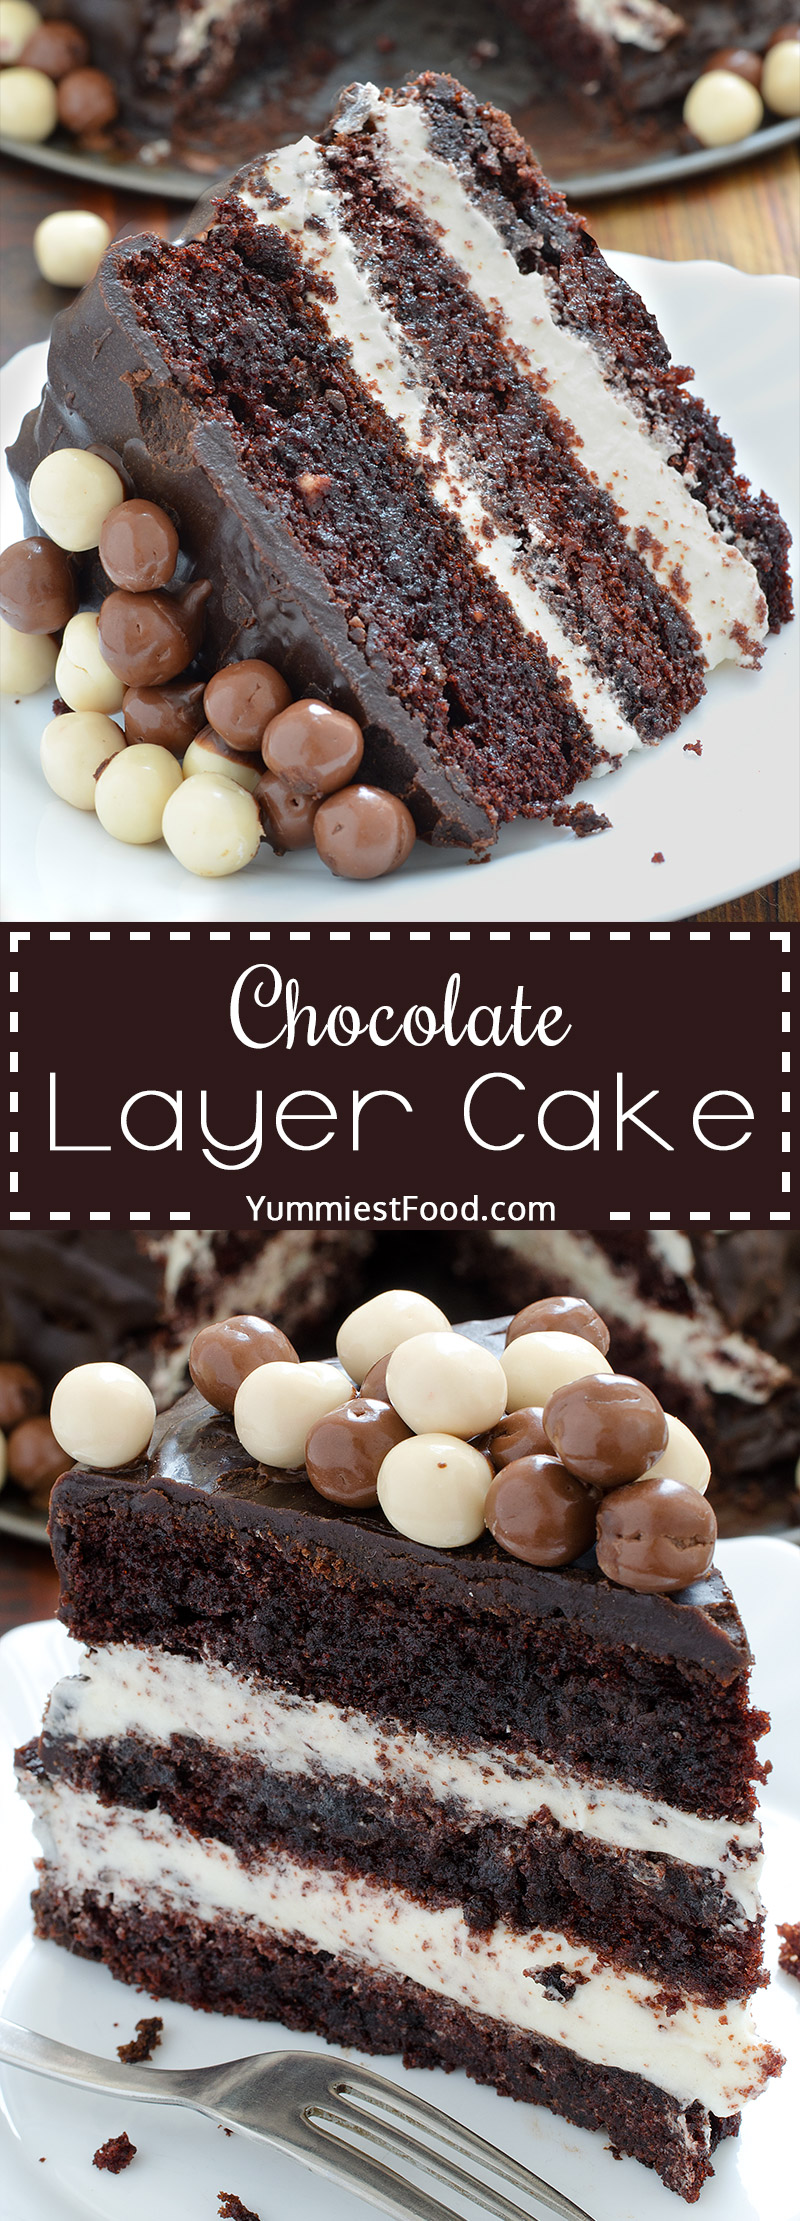  Chocolate Layer Cake with Cream Cheese Filling - perfect combination of chocolate and cheese